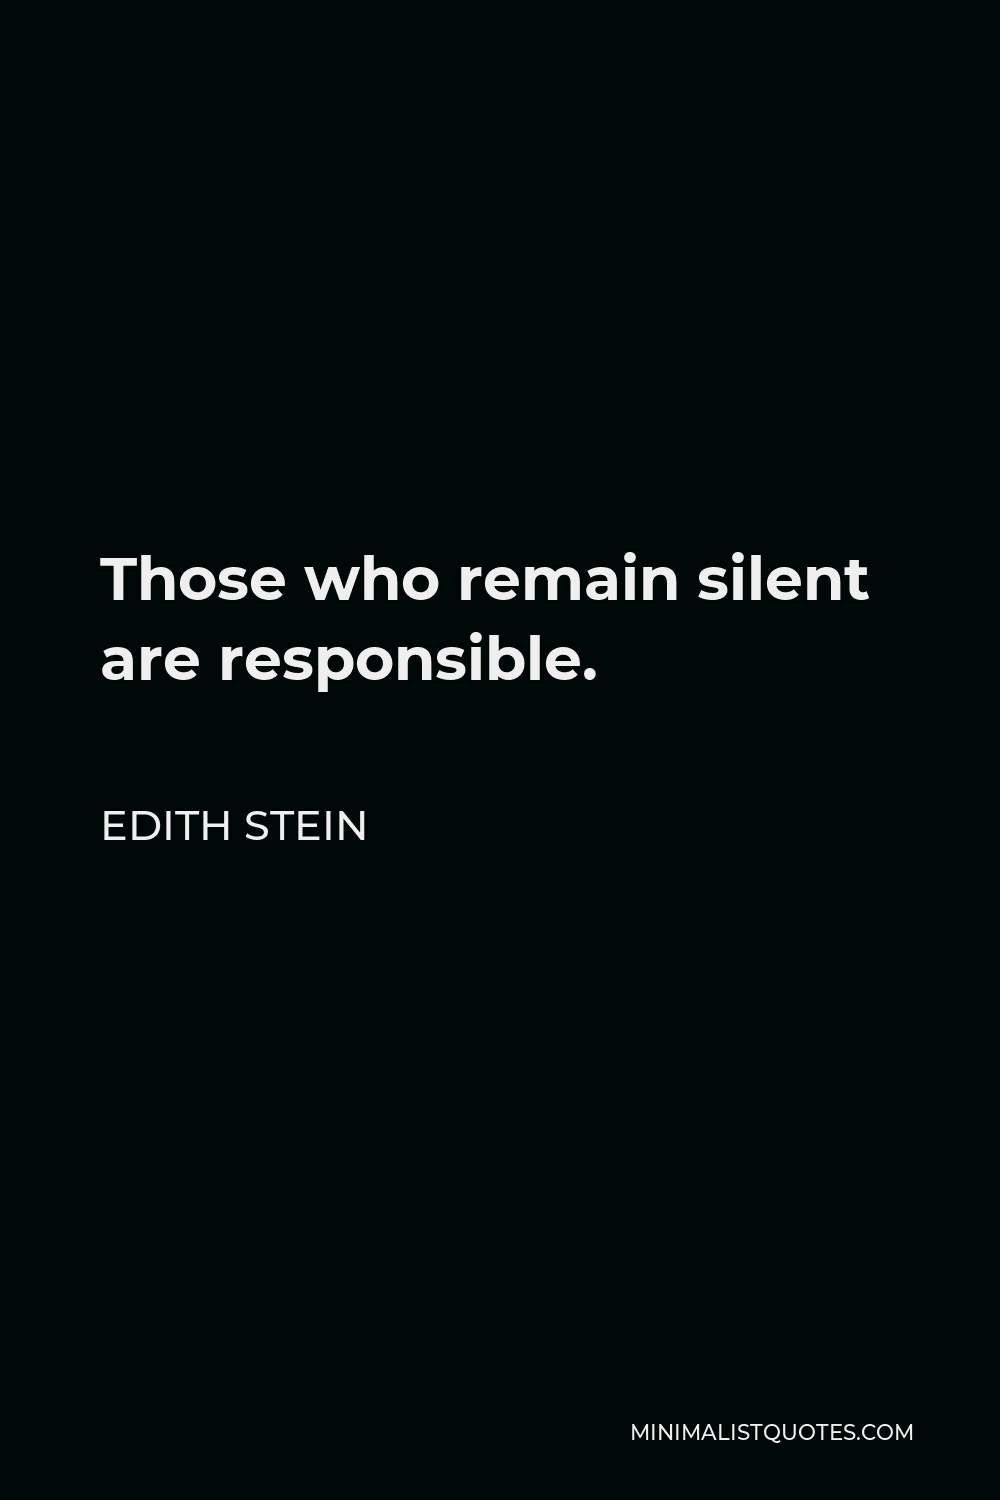 Edith Stein Quote - Those who remain silent are responsible.